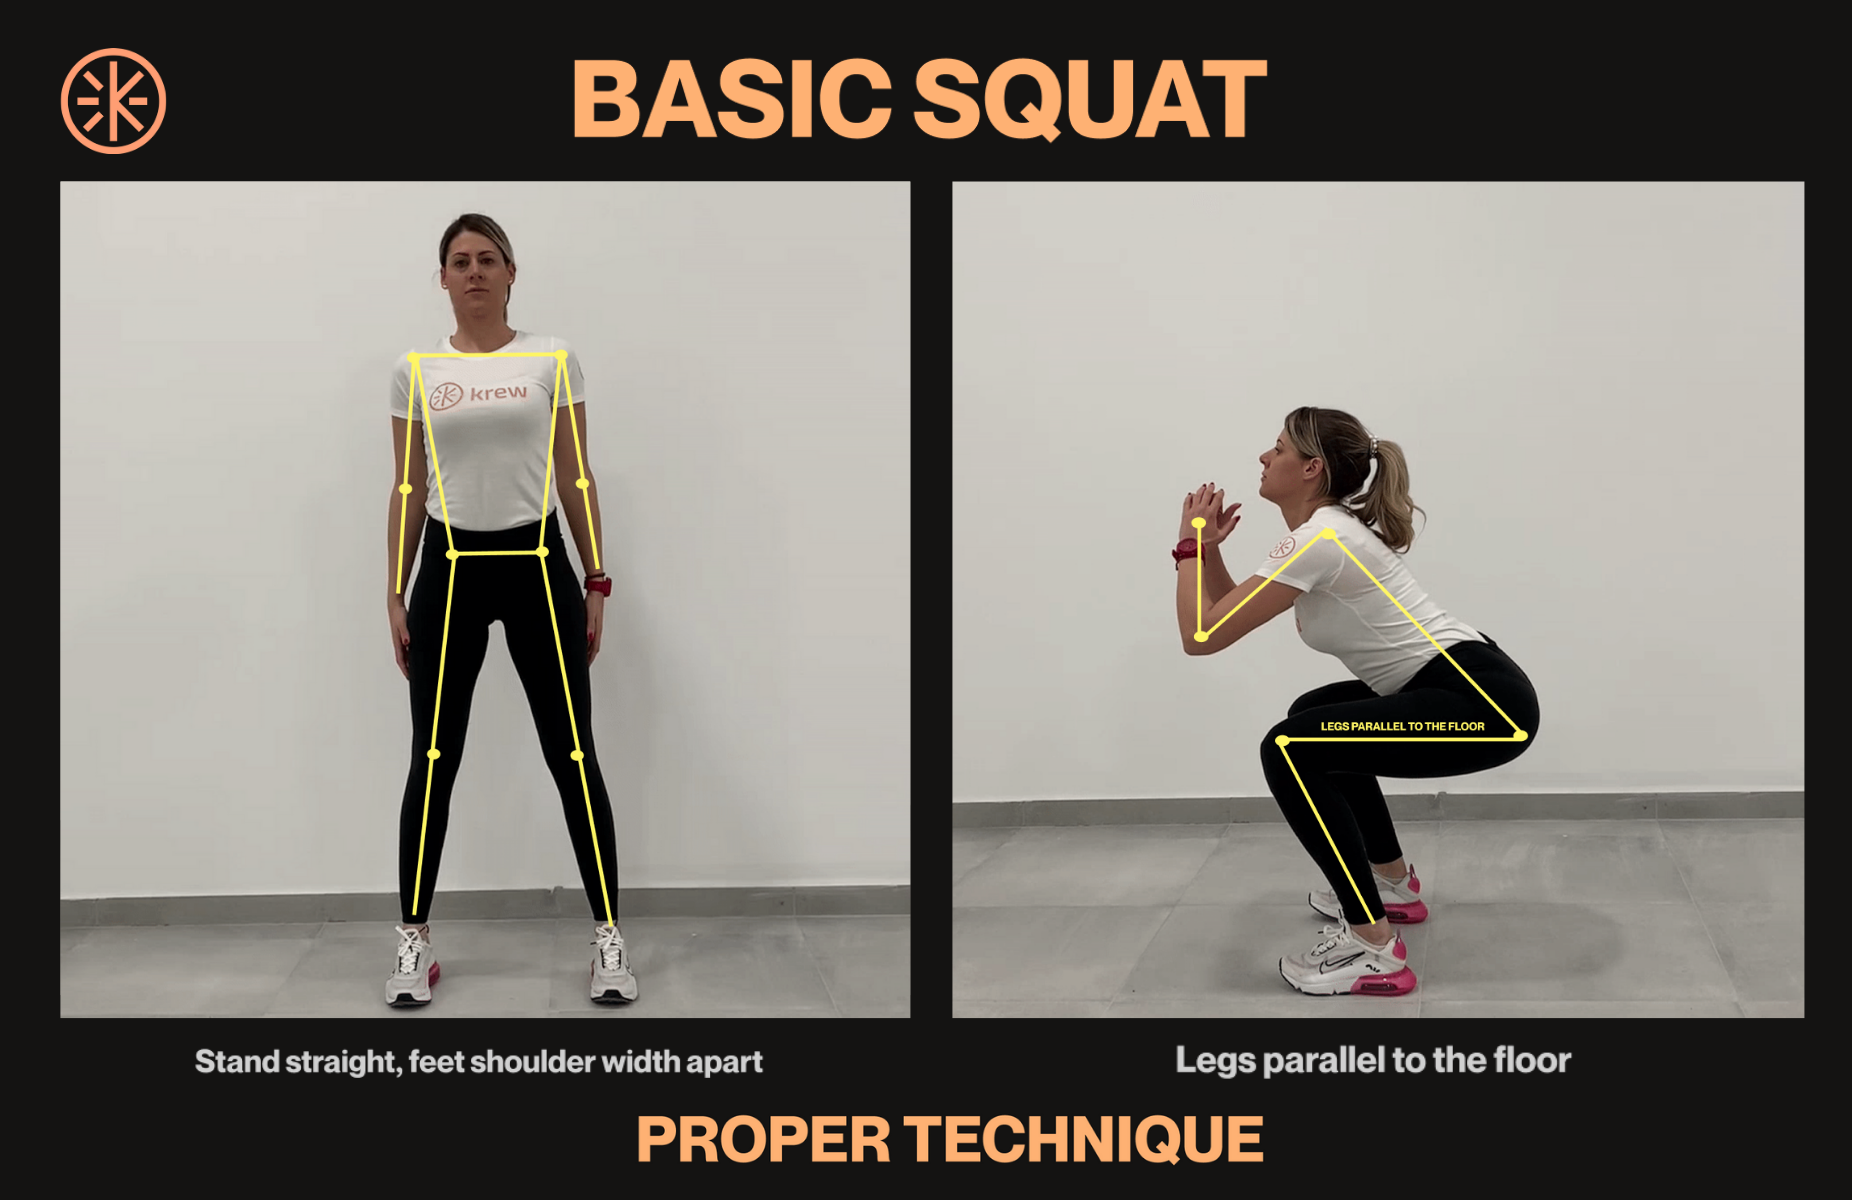 Three squat variations you can do at home